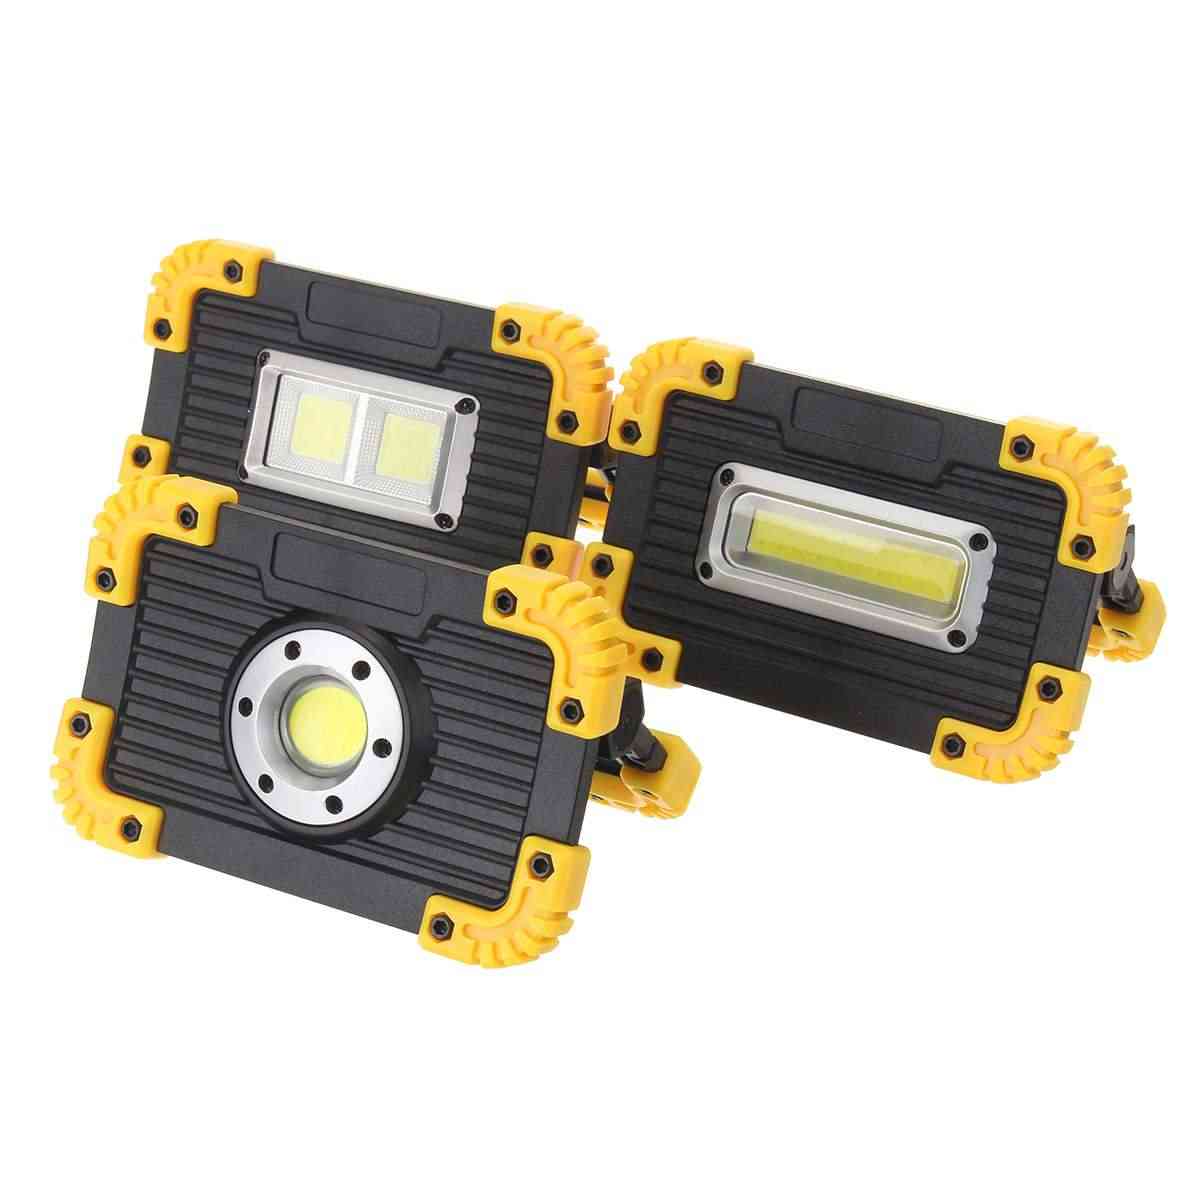 Portable Led Lamp Floodlight, Usb Charging Spot For Outdoor Work, Camping